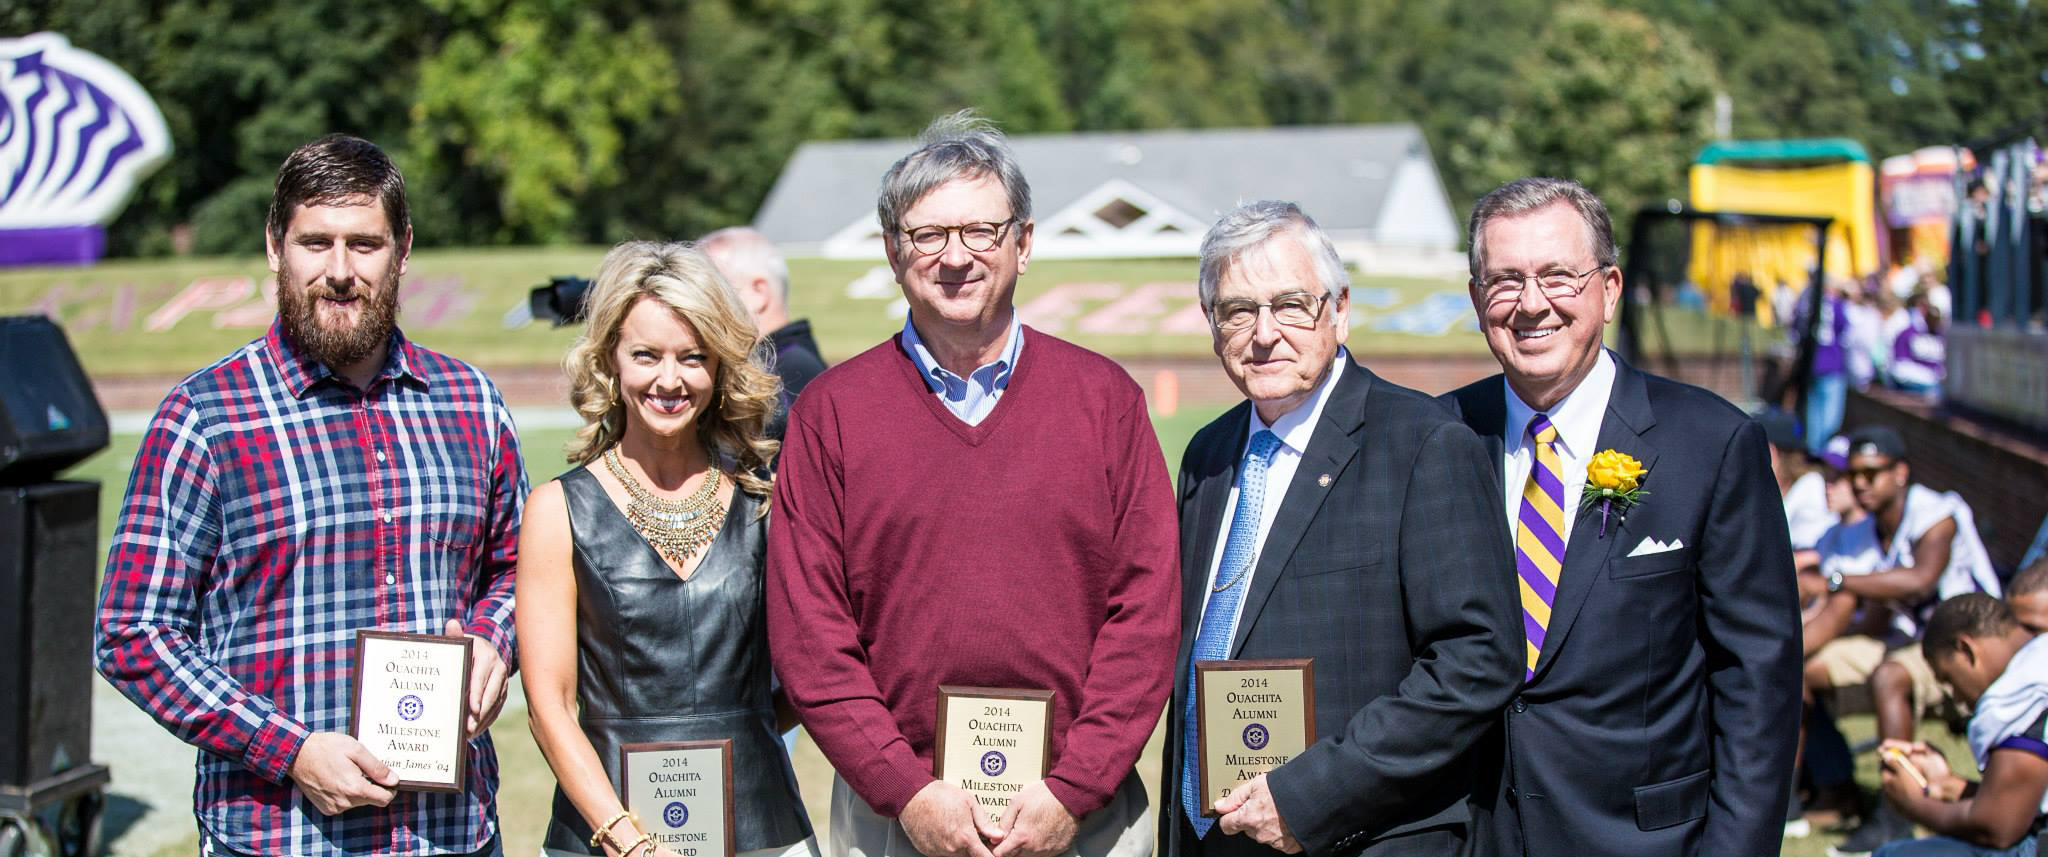 Ouachita Baptist University President Rex Horne (right) congratulates 2014 Alumni Milestone Award recipients (from left) Nathan James, Mica Strother, Richard Lusby and Dr. David Blase. Not pictured is Jamie Fowler.